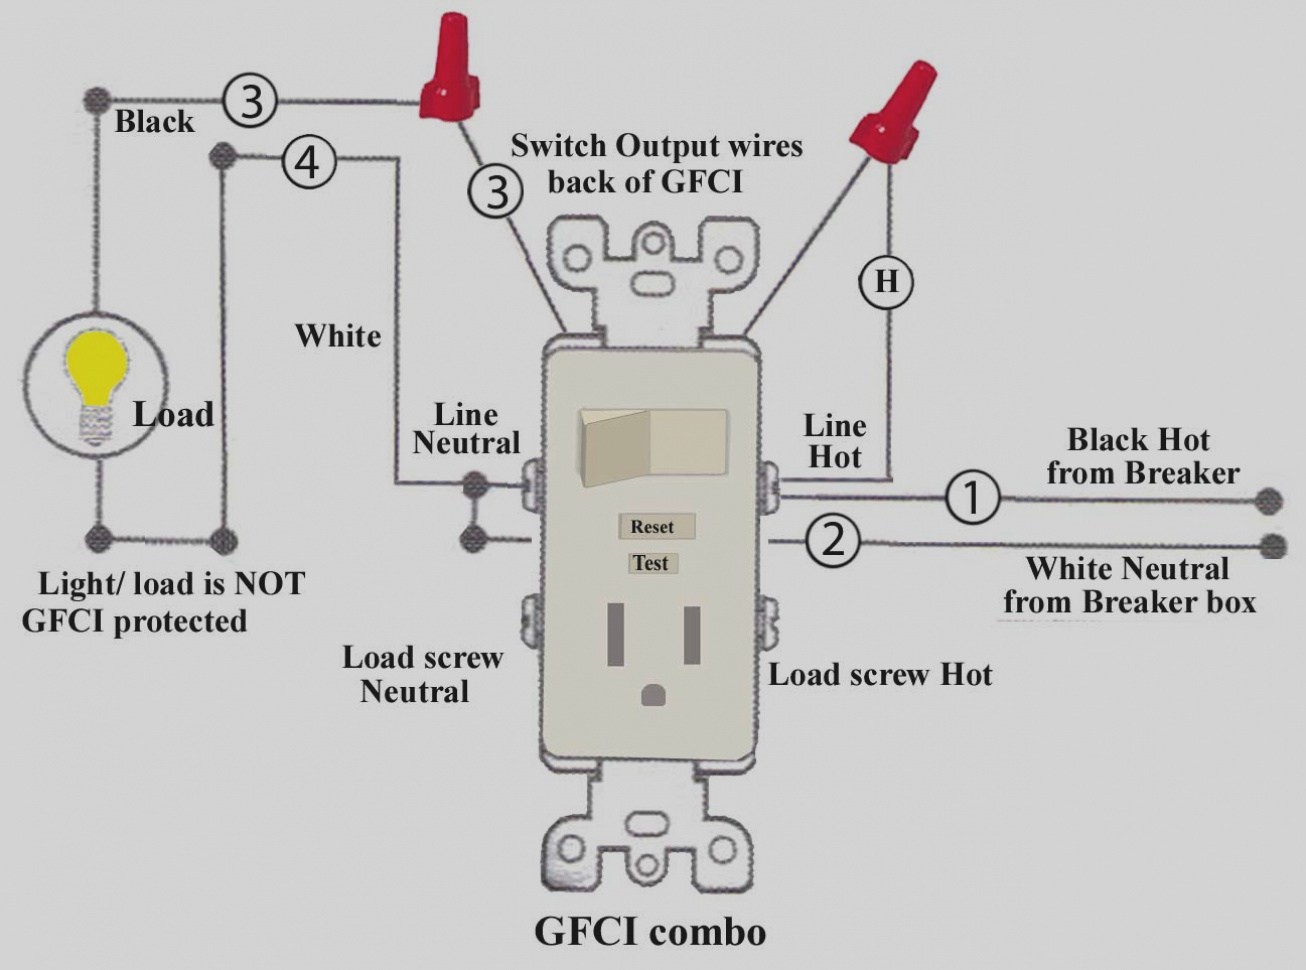 free wiring diagram Collection How To Wire A Switched Outlet Diagram Wiring Light Switch